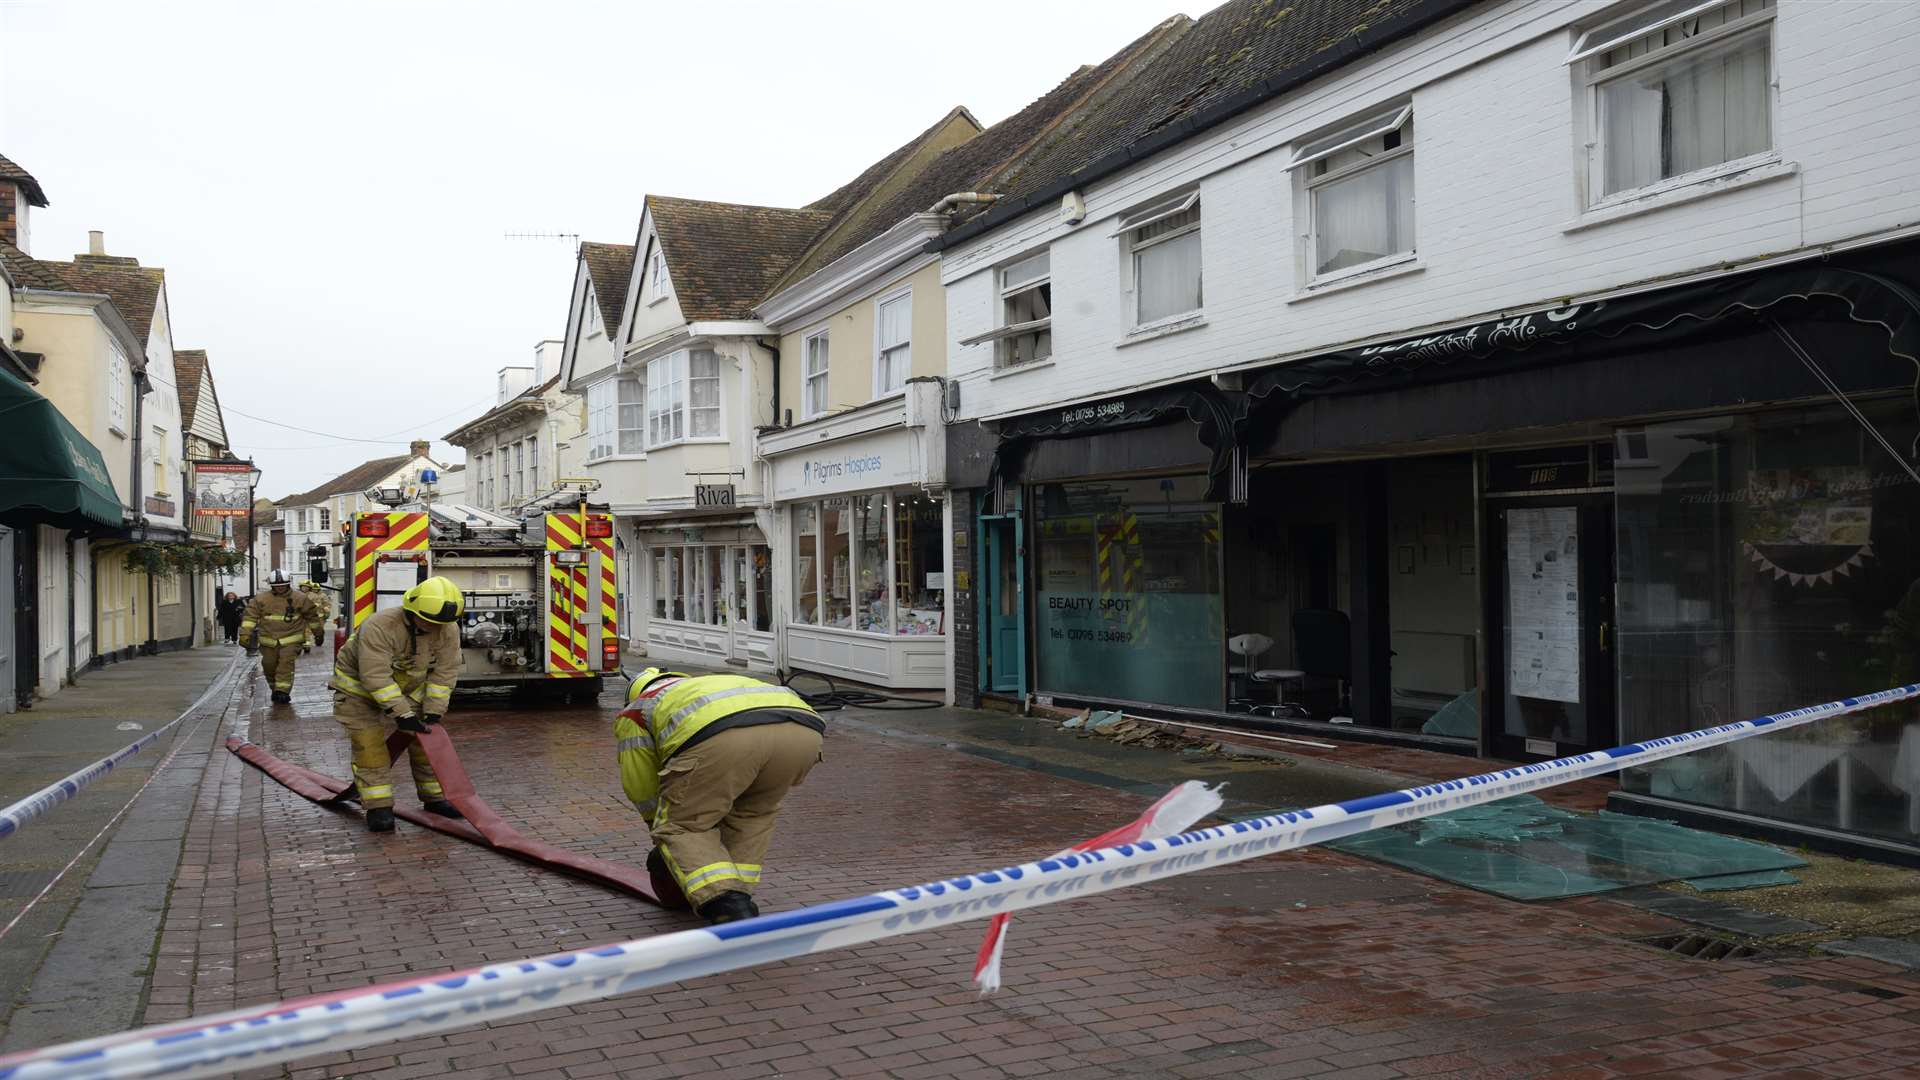 The scene of the fire in West Street